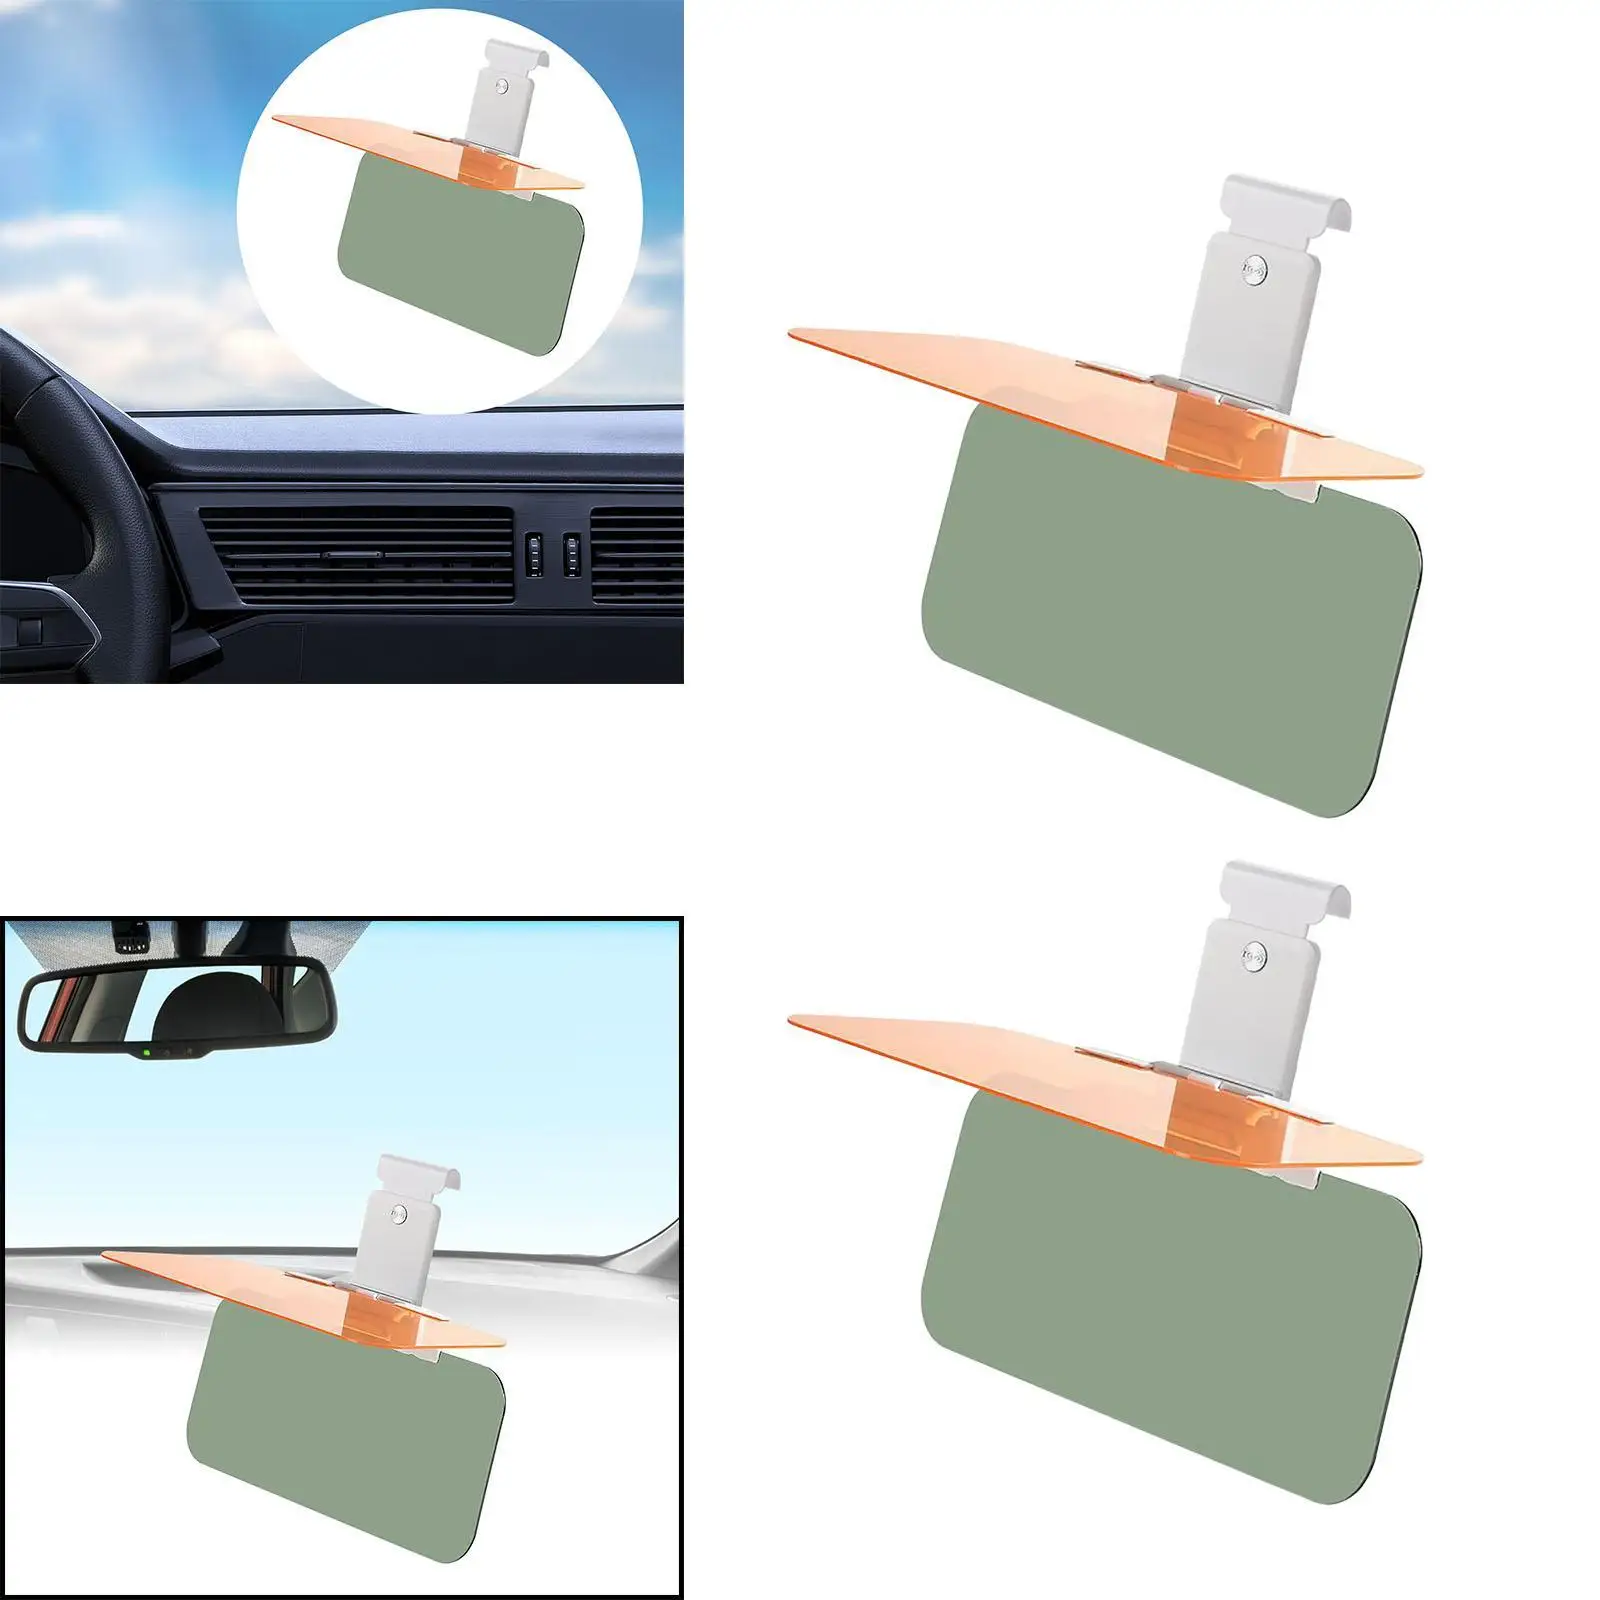 

Universal 2 in 1 Day And Night Sun Visor Extension for Safer Driving,